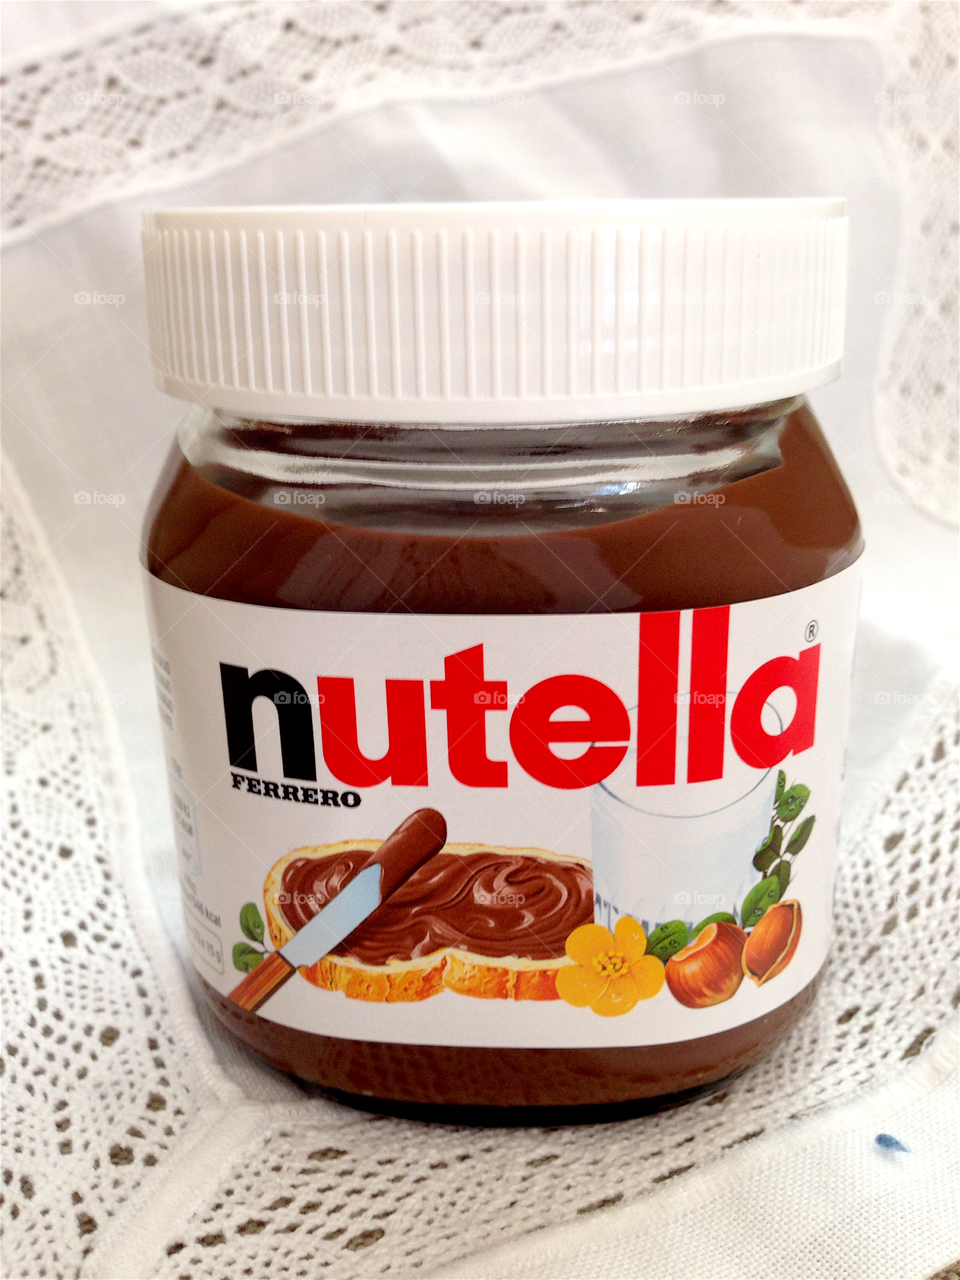 Nutella . Will make crepes soon